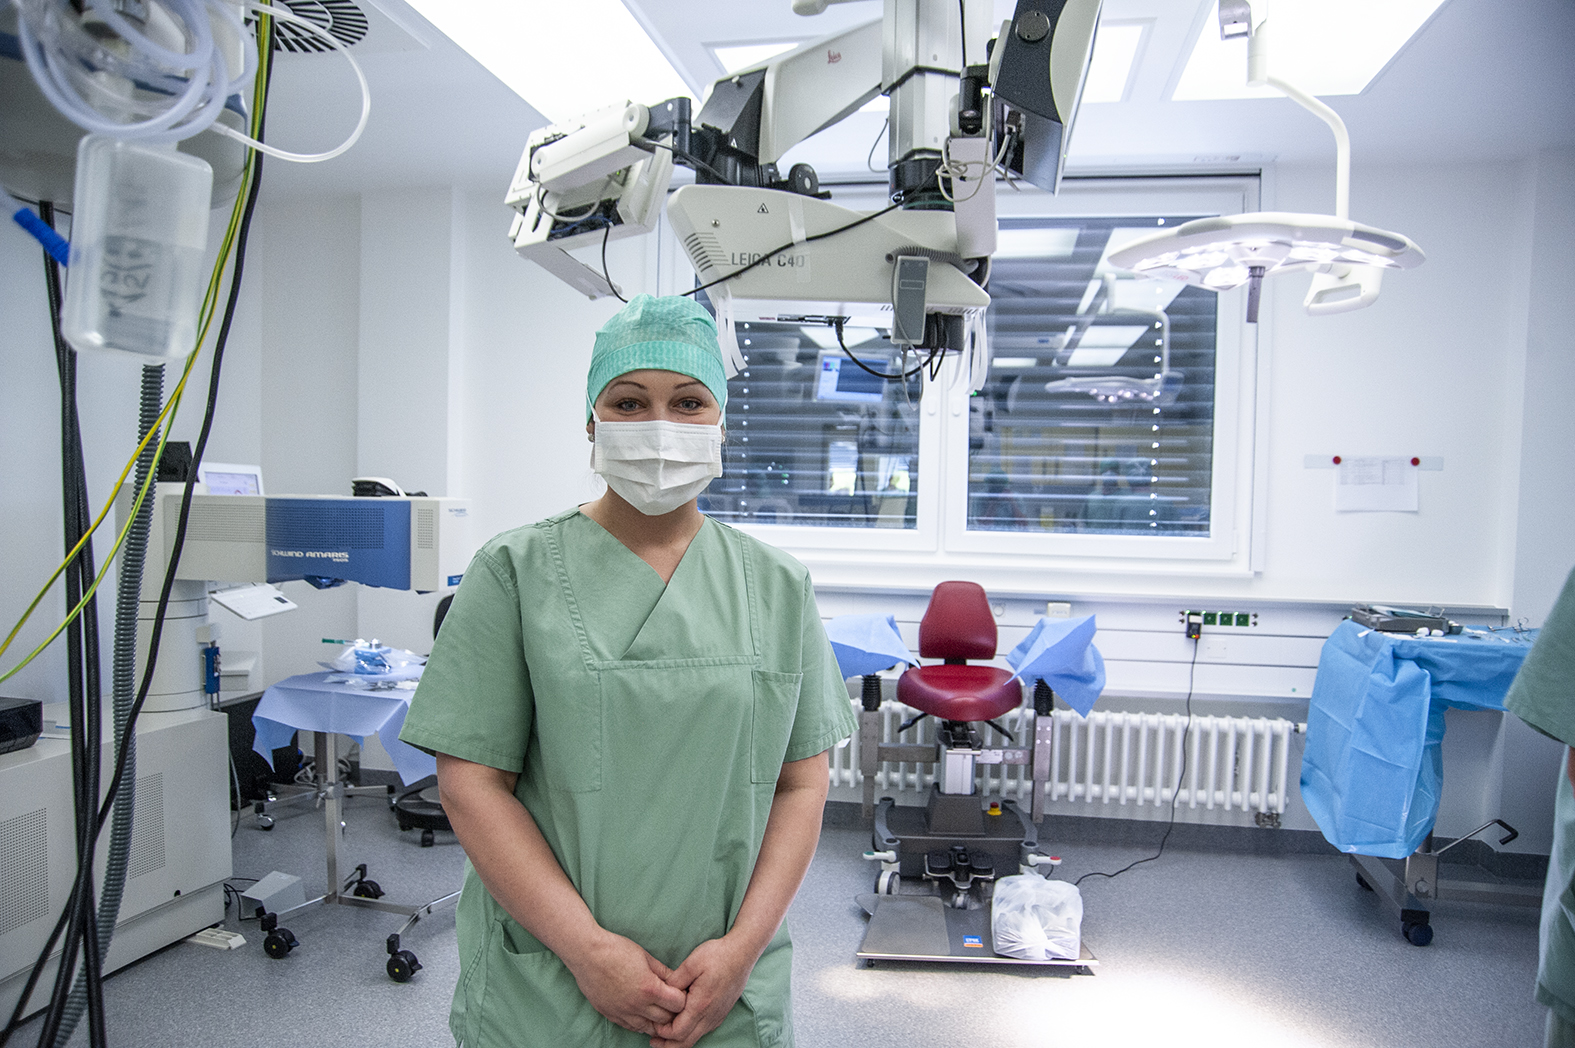 View into an operating room for eye surgery. In the foreground is a surgical assistant.